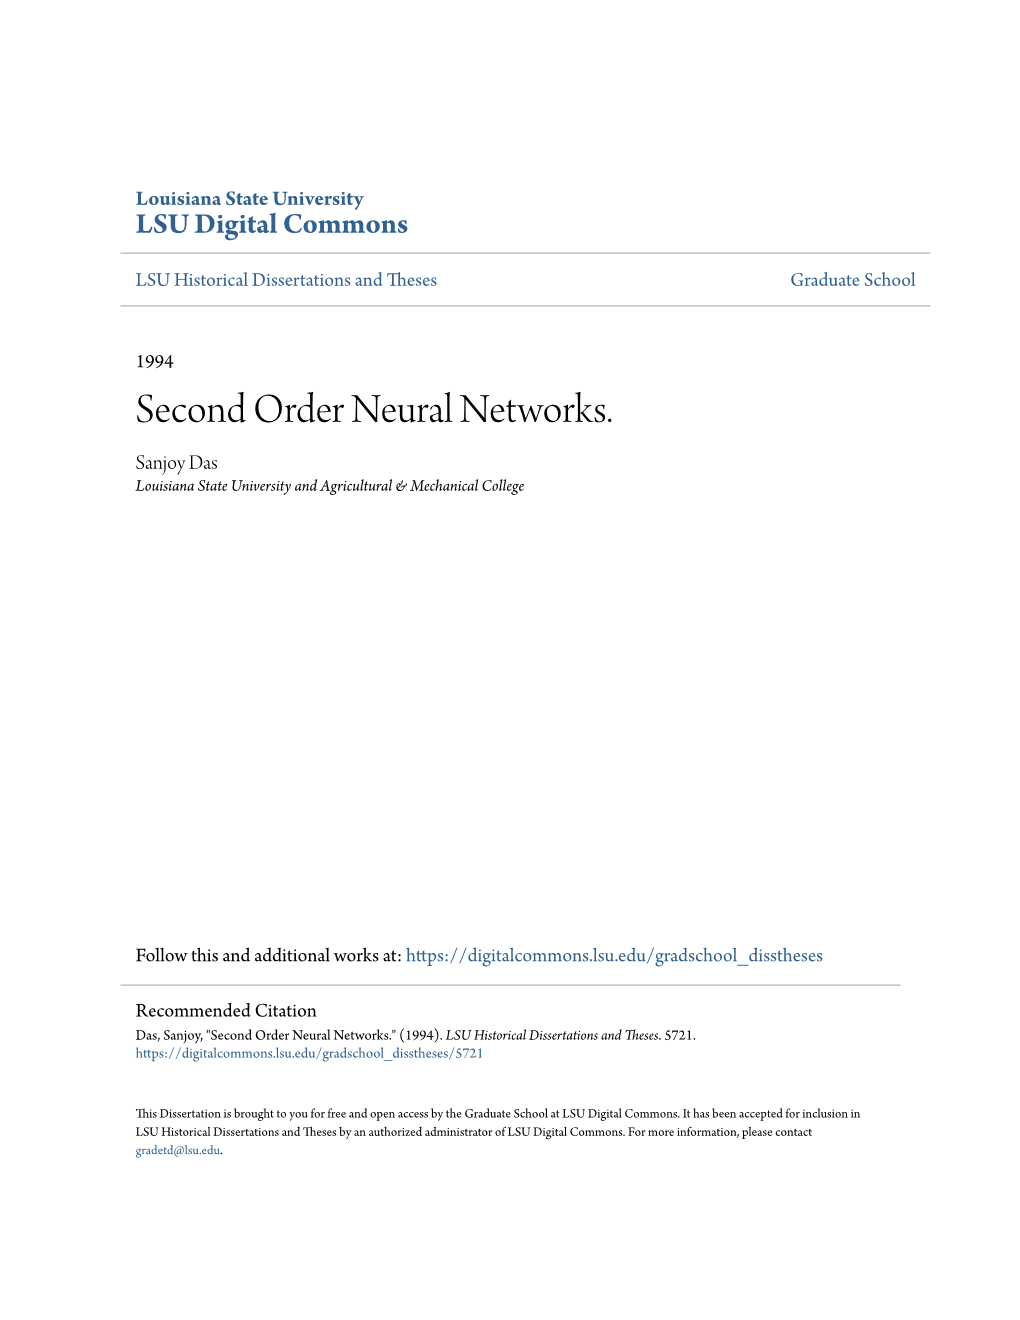 Second Order Neural Networks. Sanjoy Das Louisiana State University and Agricultural & Mechanical College